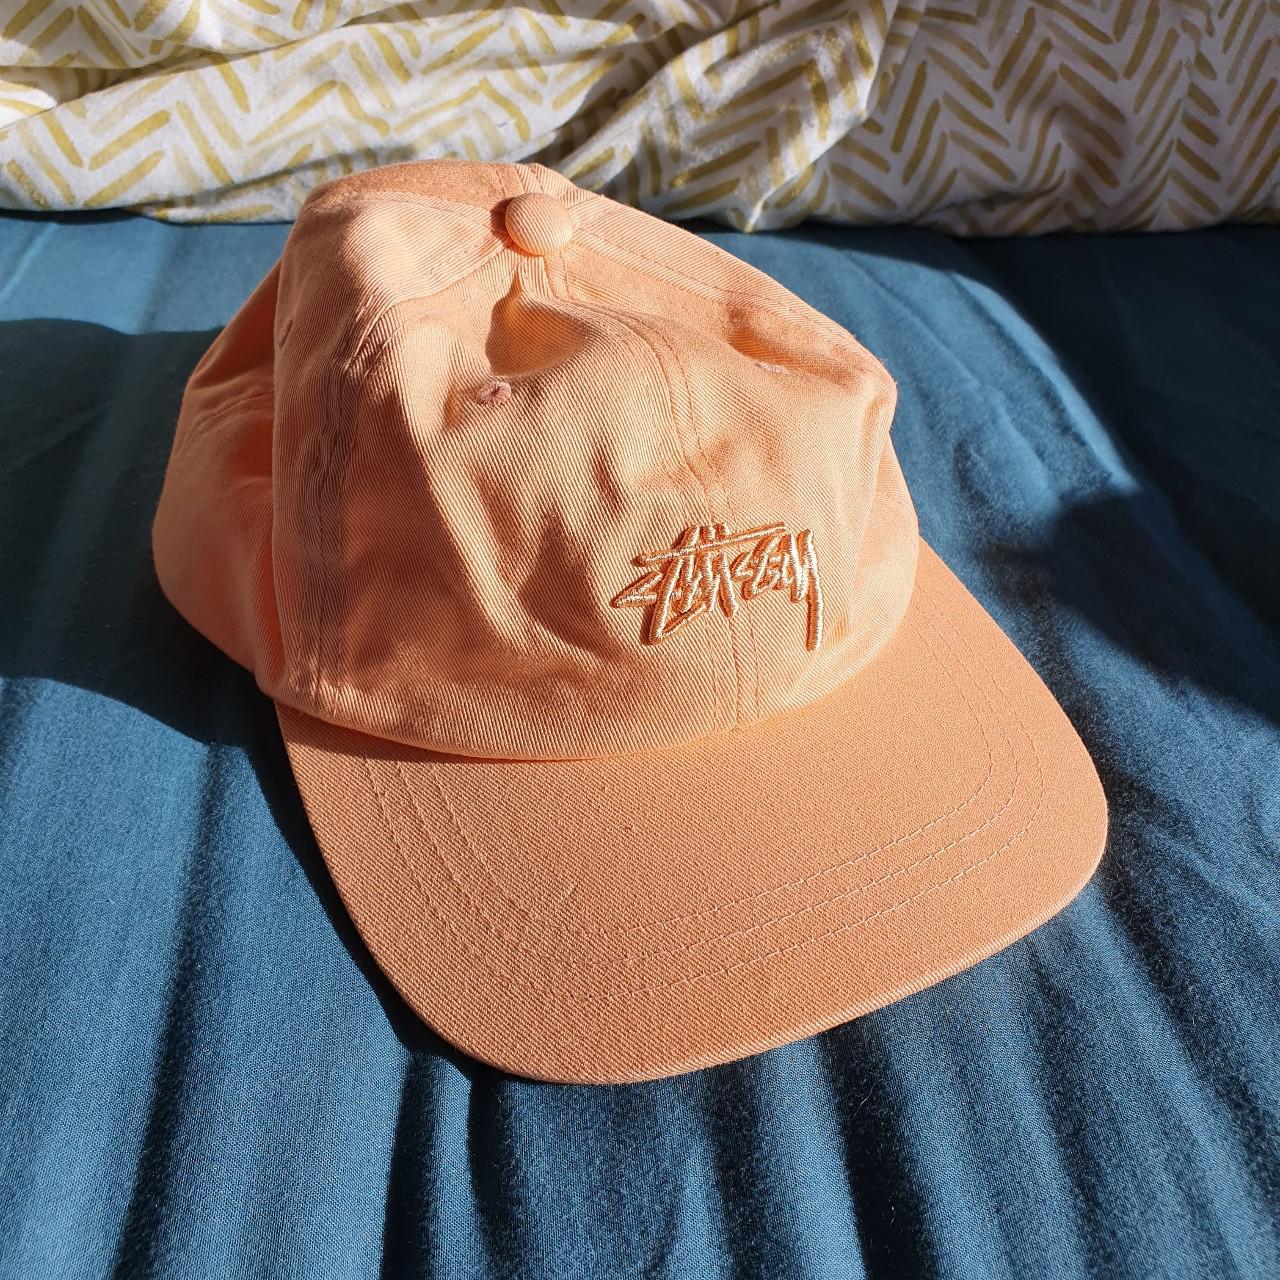 Product Image 1 - Coral pink Stussy Cap
⚡ Brand